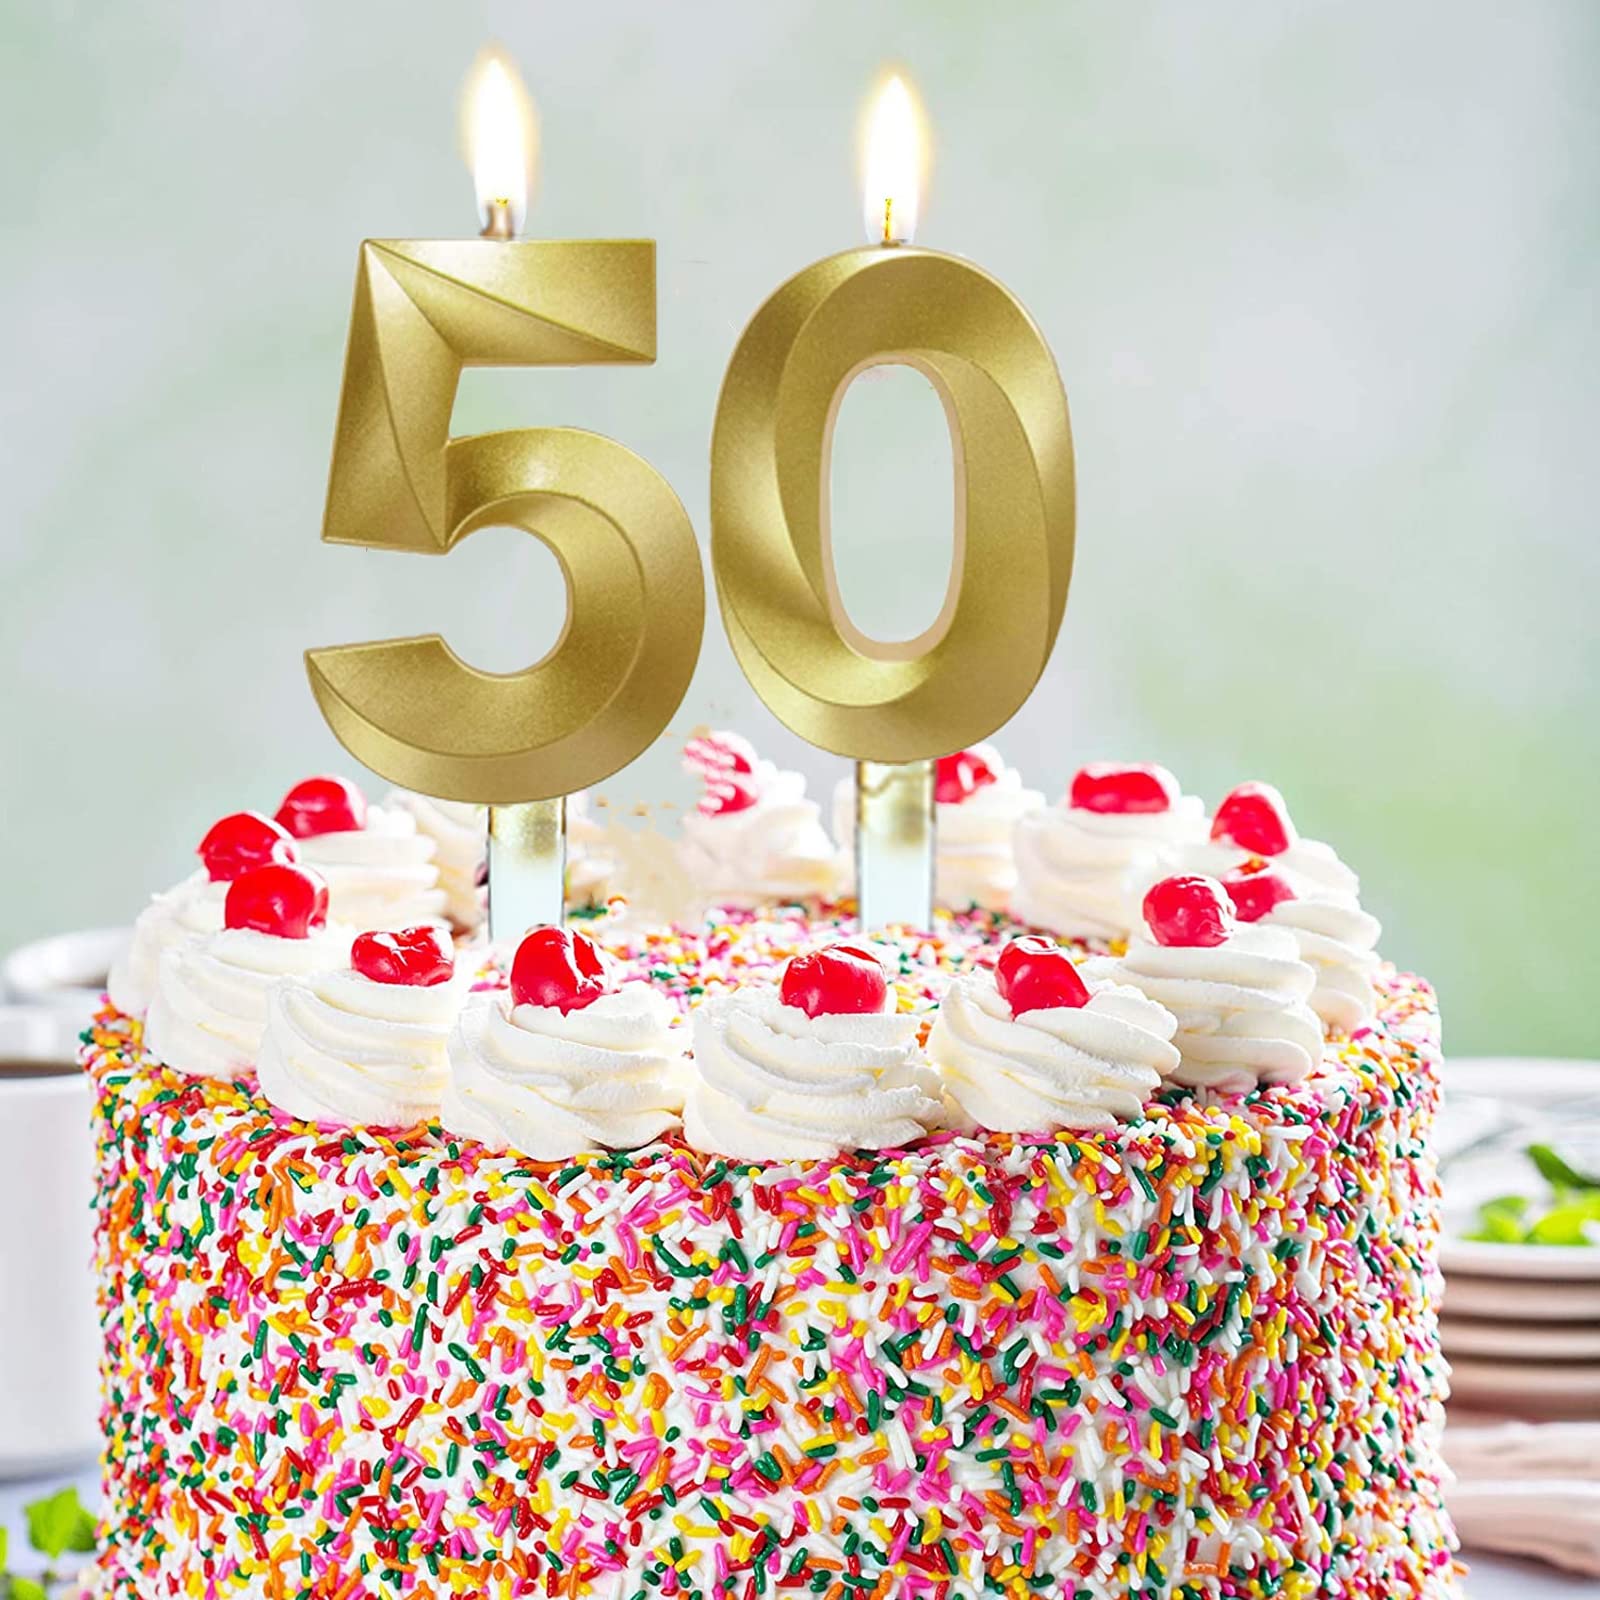 60th Birthday Number Candles, 60th Birthday Party Cake Candles Cupcake Toppers, Number Candles for Birthday Anniversary Wedding Party, Gold Number Forty Candles on Sticks for Cake Decoration